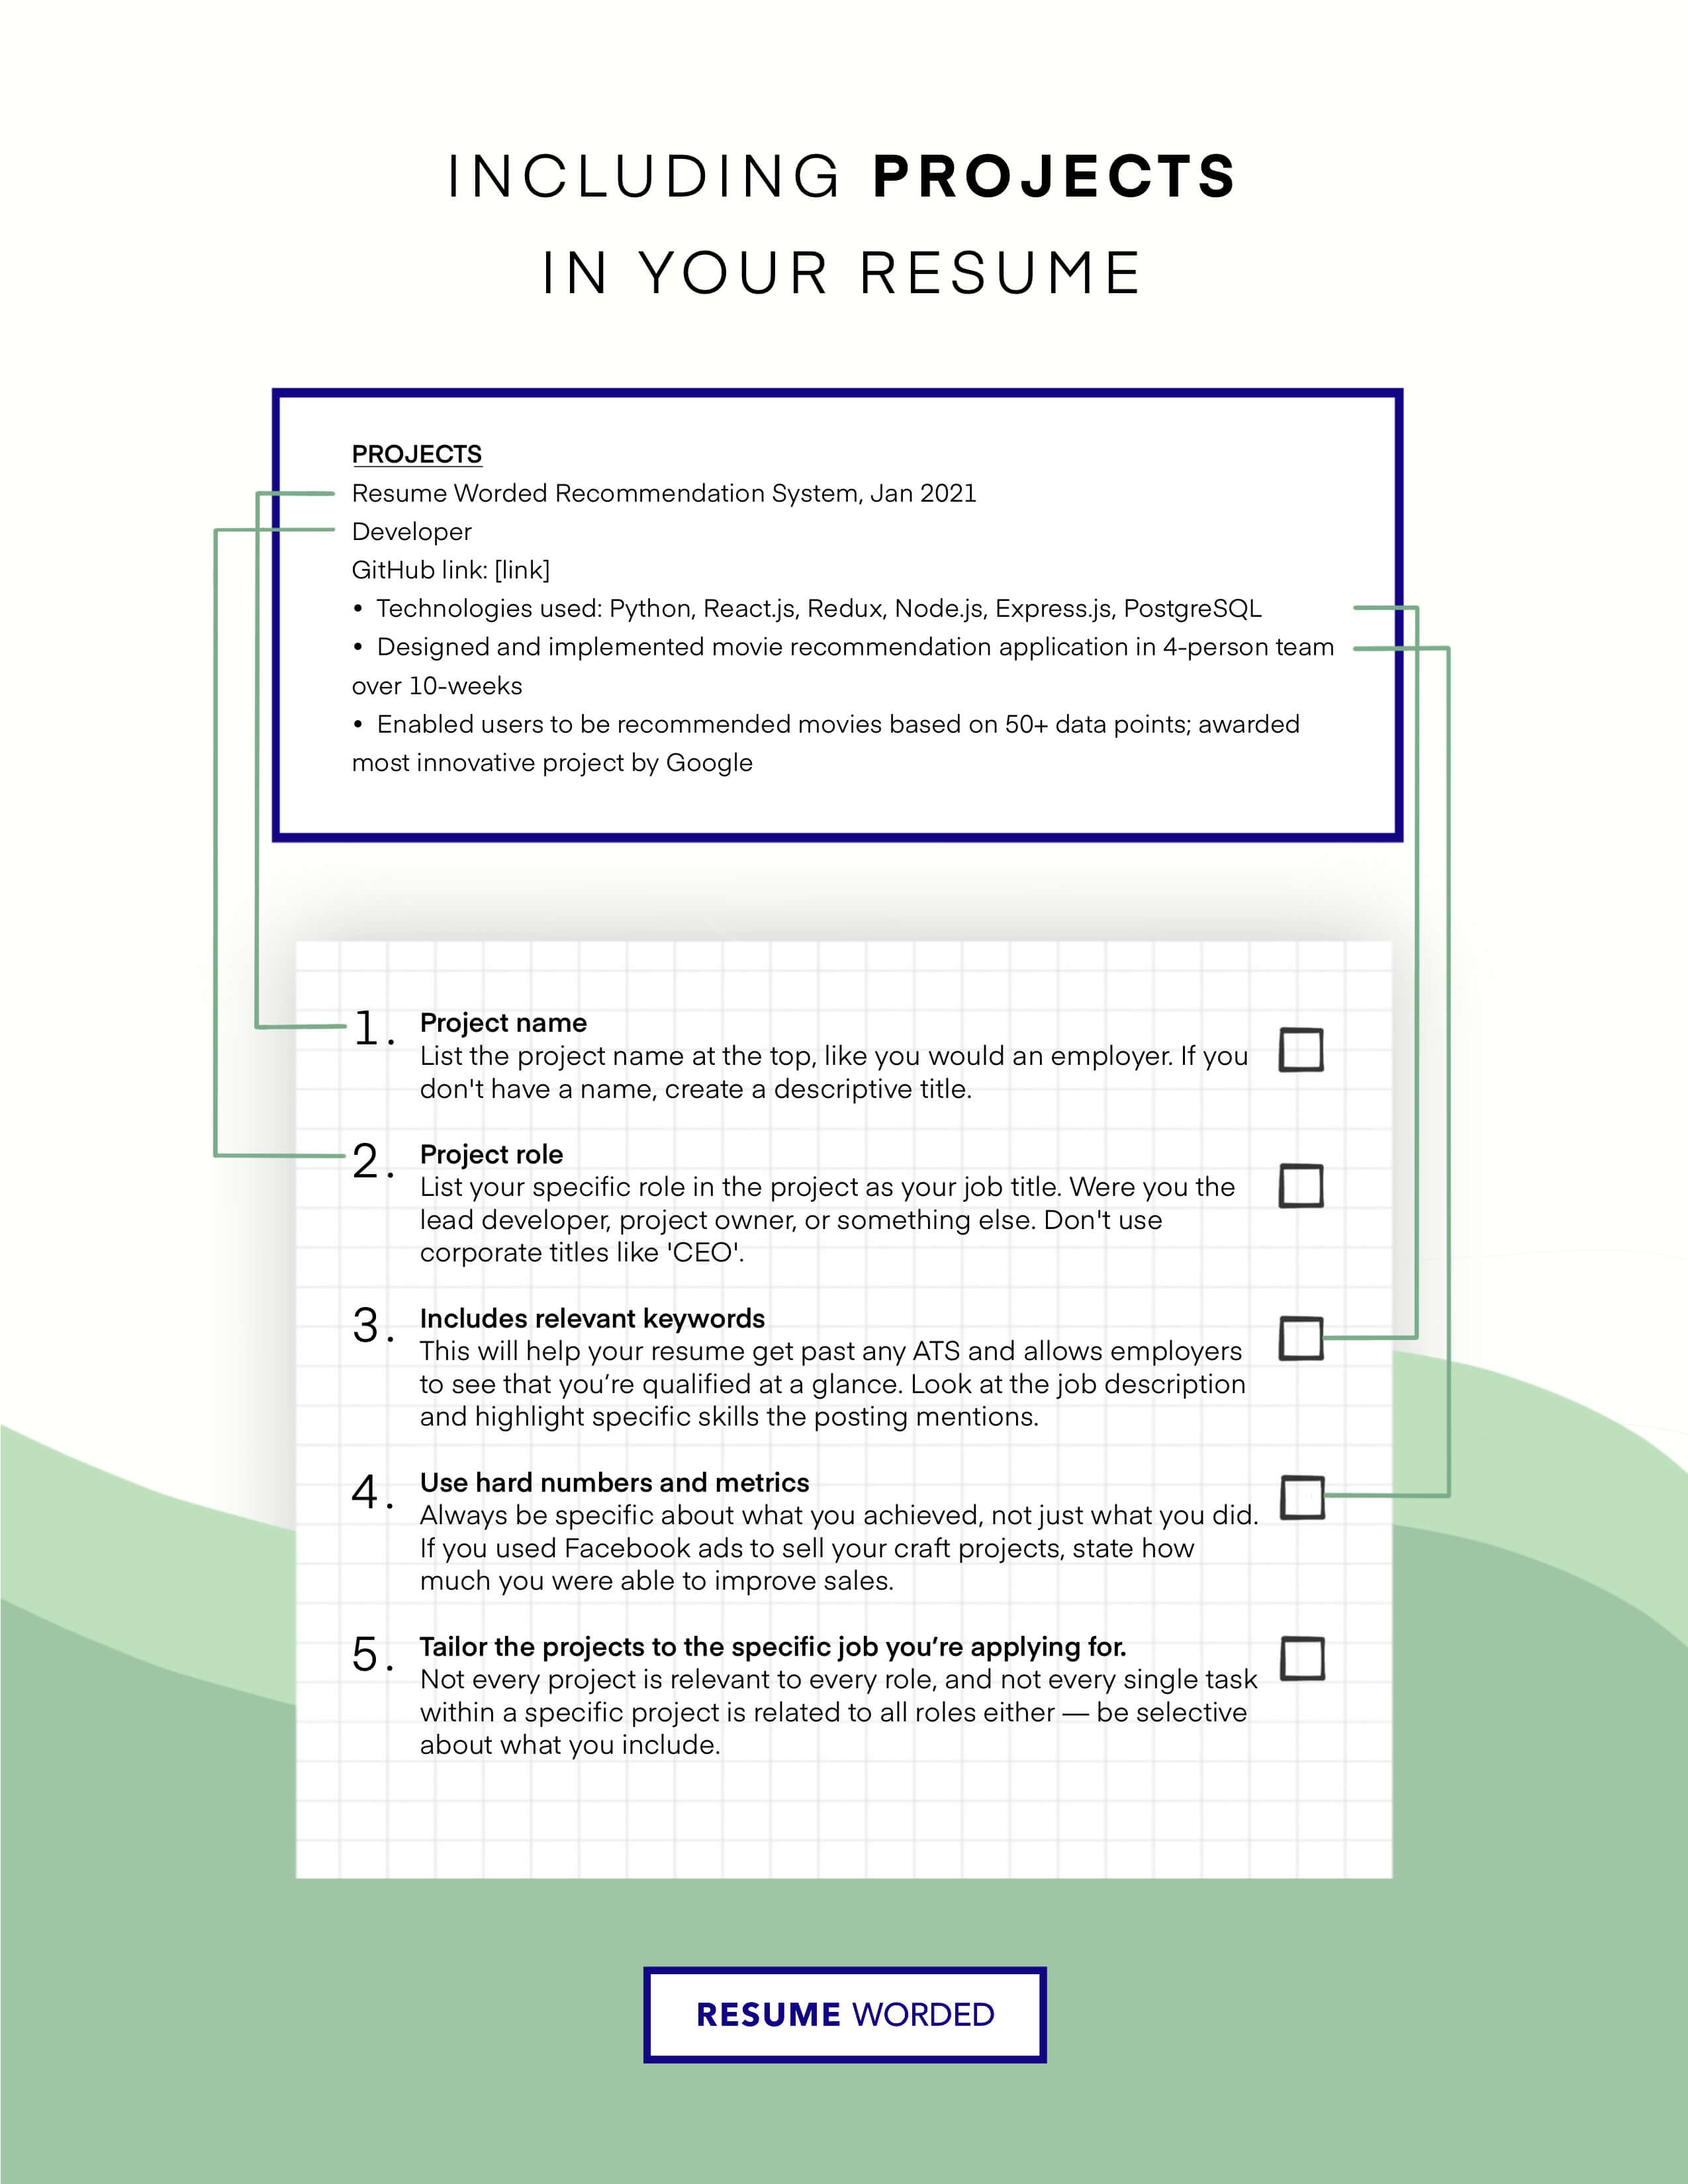 A step by step guide on how to list projects on your resume